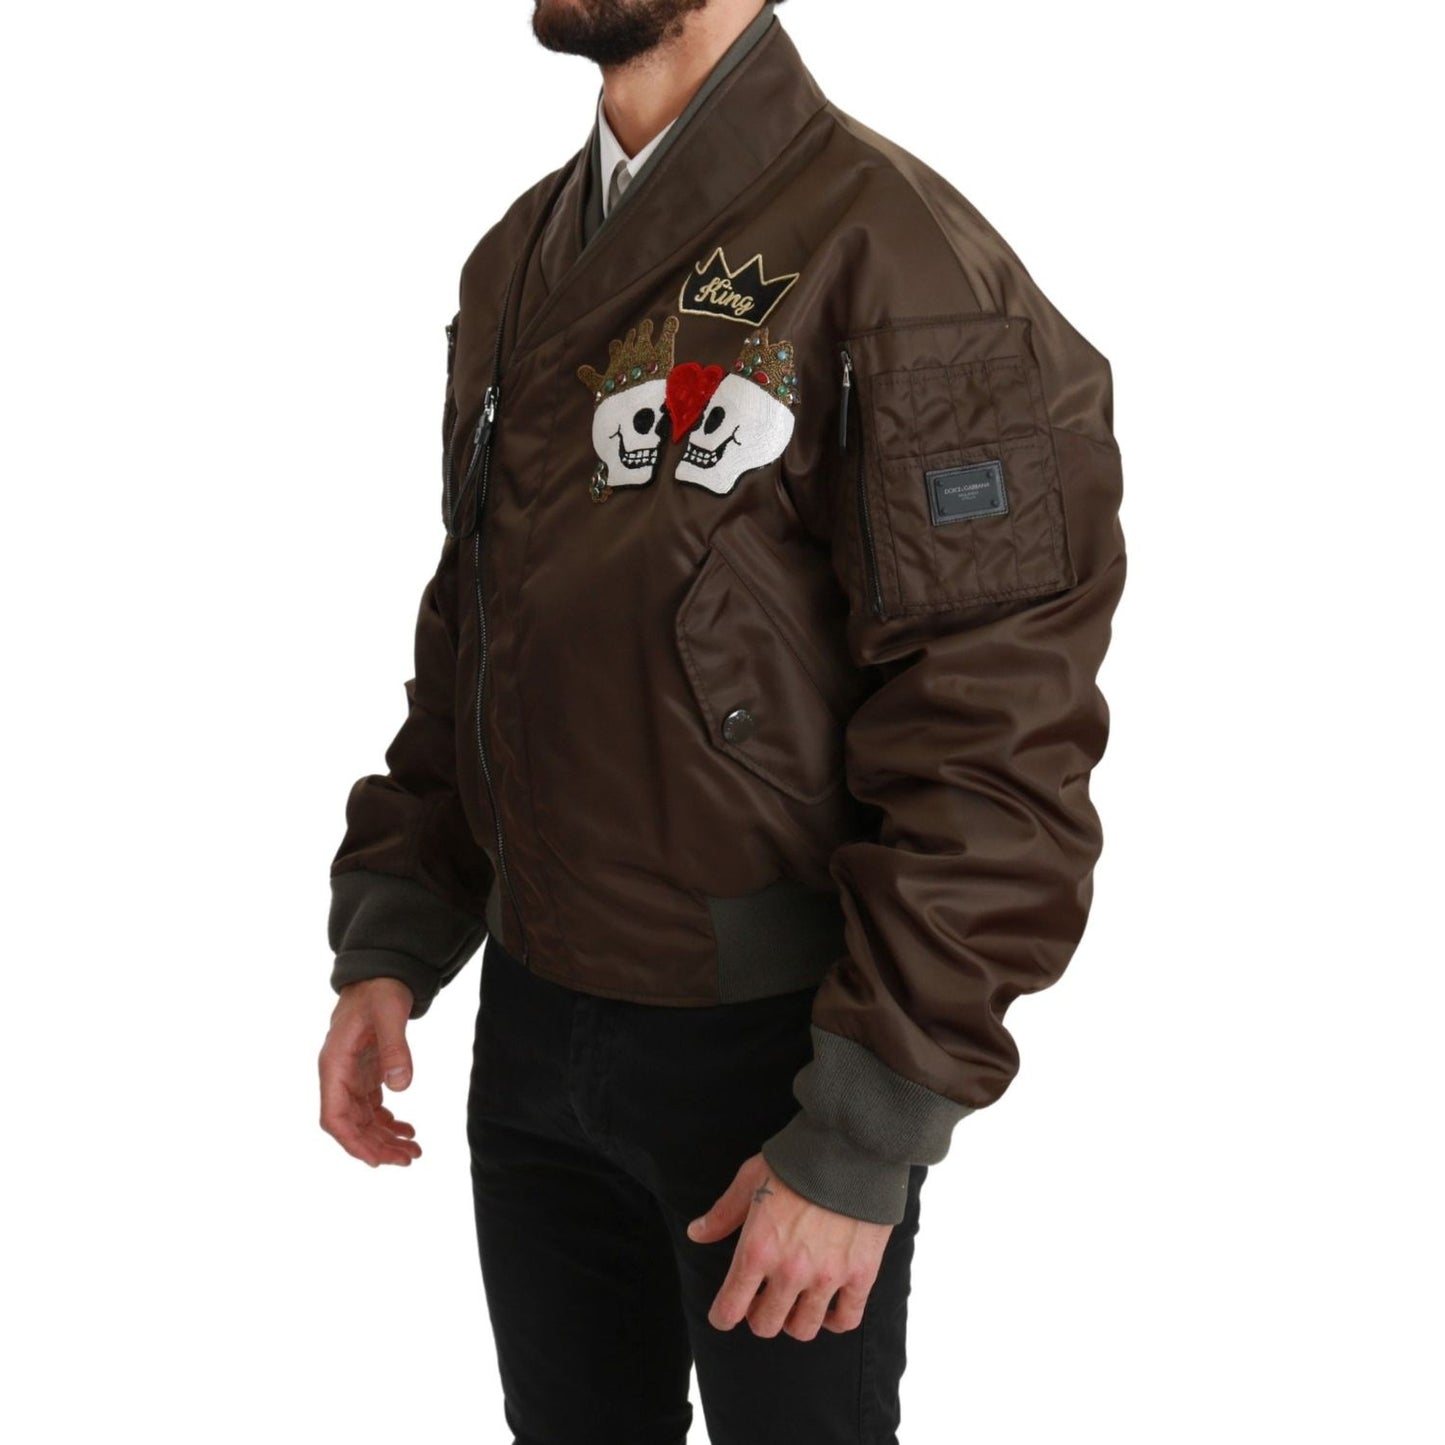 Dolce & Gabbana Sequined Double-Breasted Bomber Jacket Coats & Jackets brown-beaded-crown-skull-logo-jacket